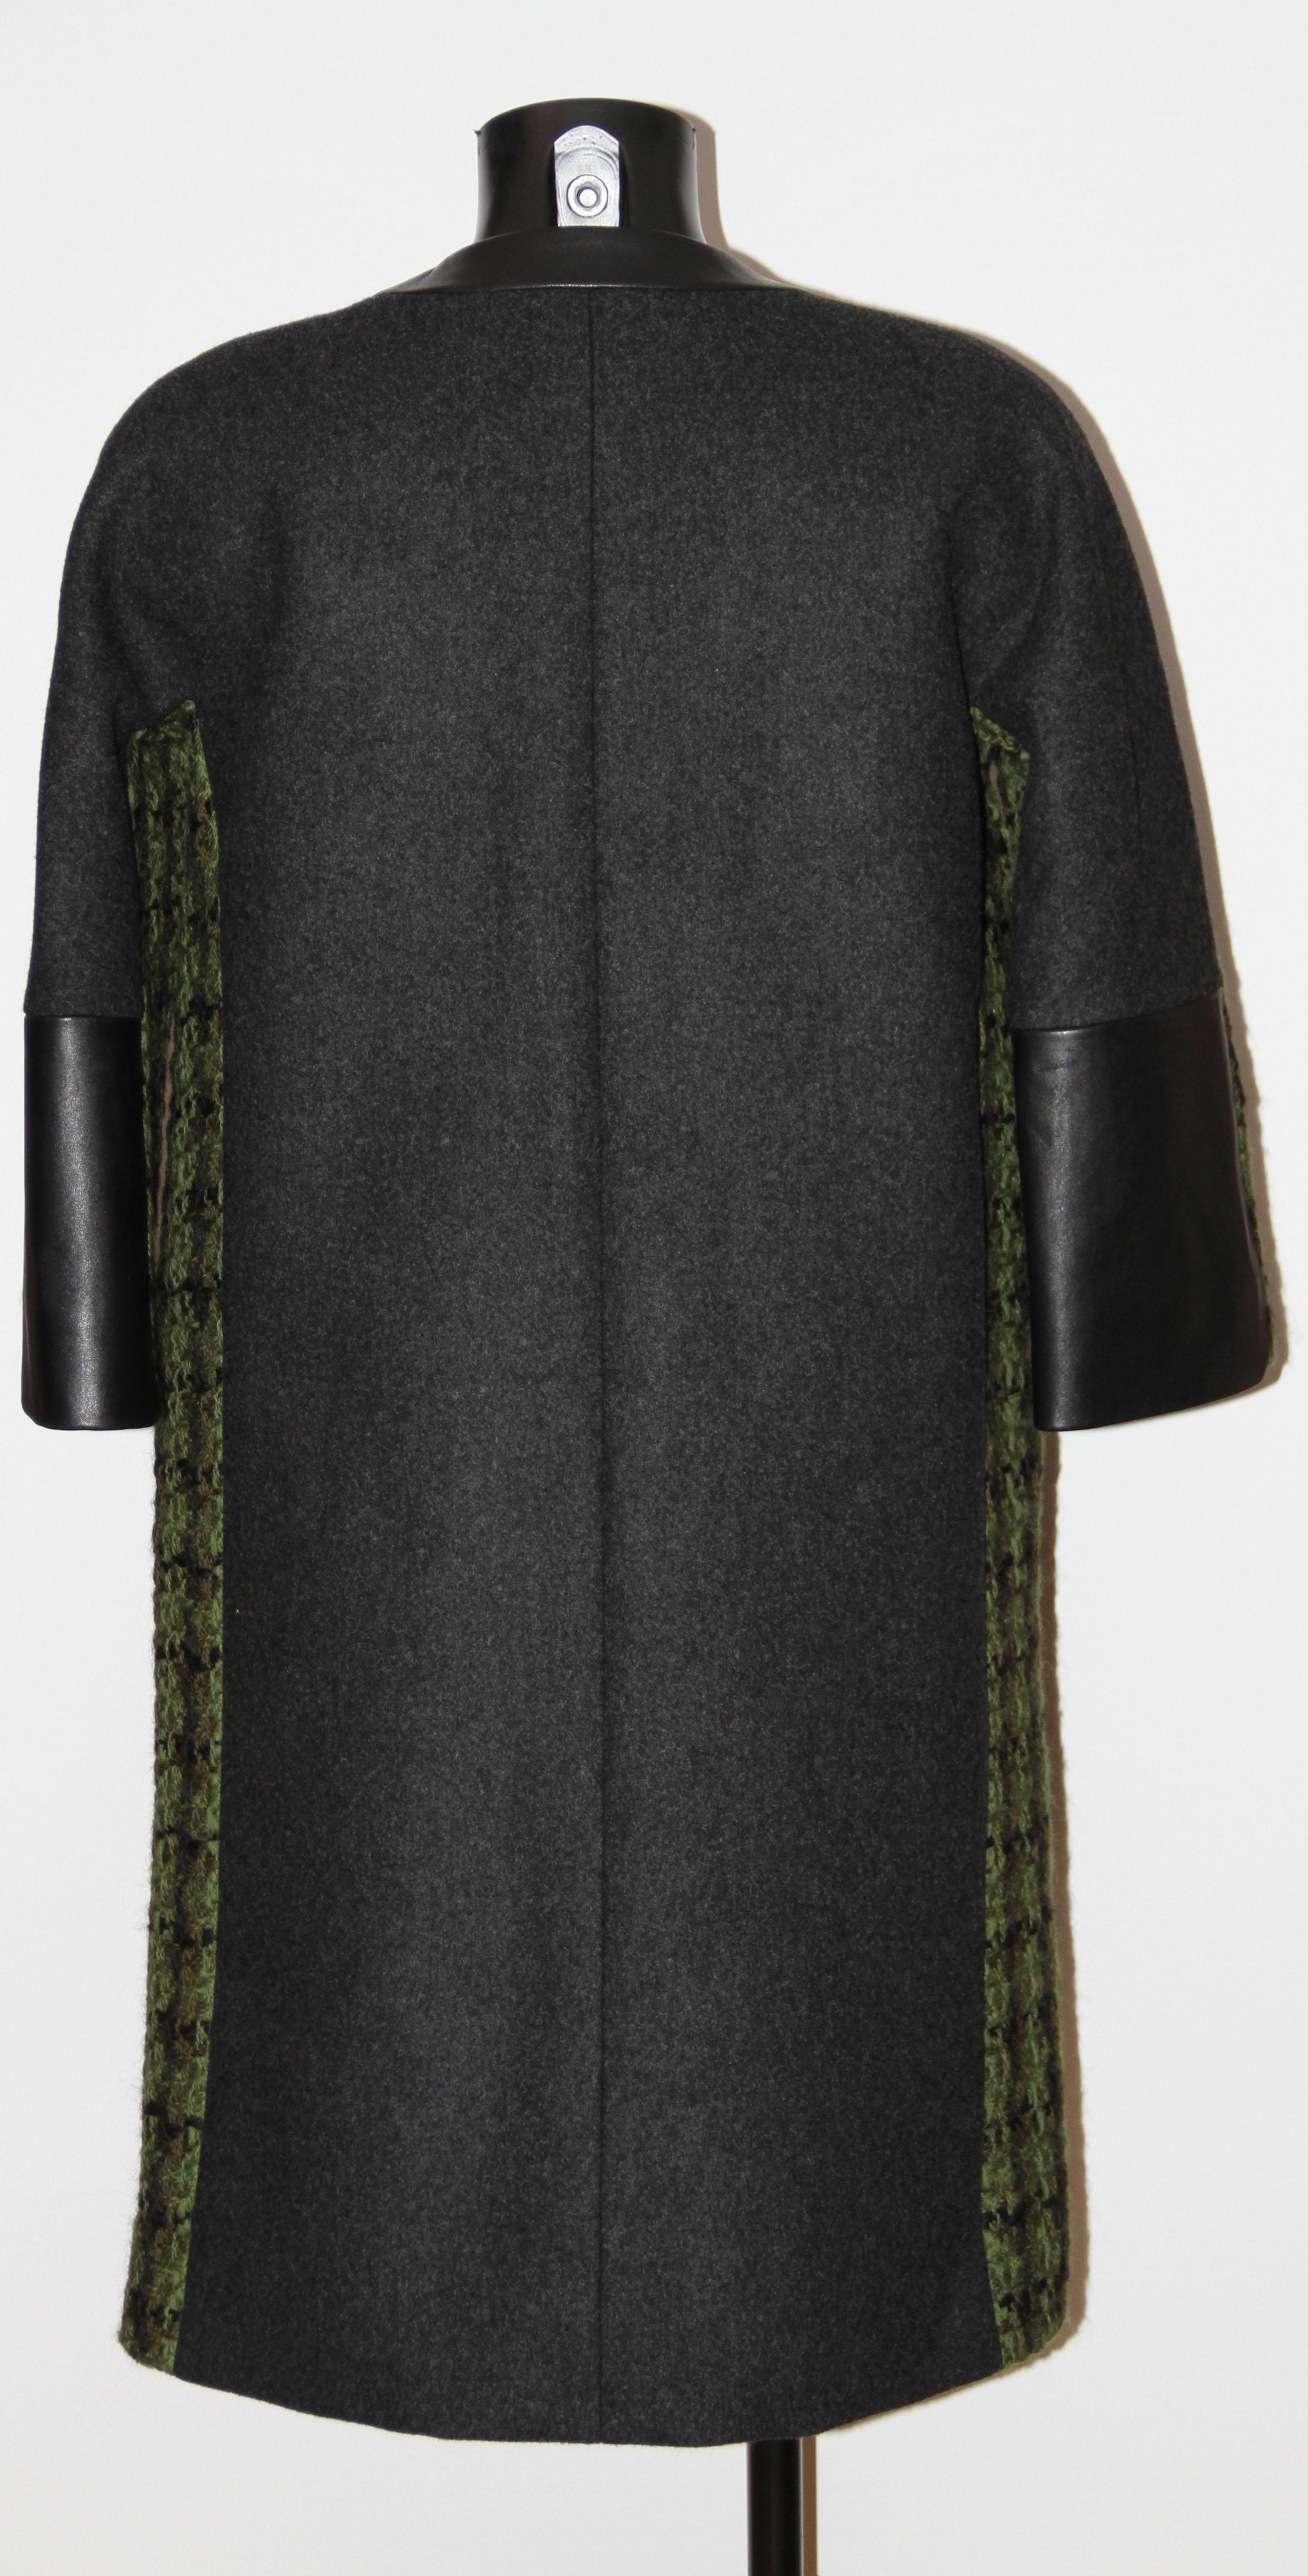 This pre-owned kaki, grey and black Louis Vuitton knee-length oversize coat features raglan sleeves, pockets at hips and button closures at front.
It is made of wool mix tartan and grey fabric as well as lambskin leather sleeves and pockets